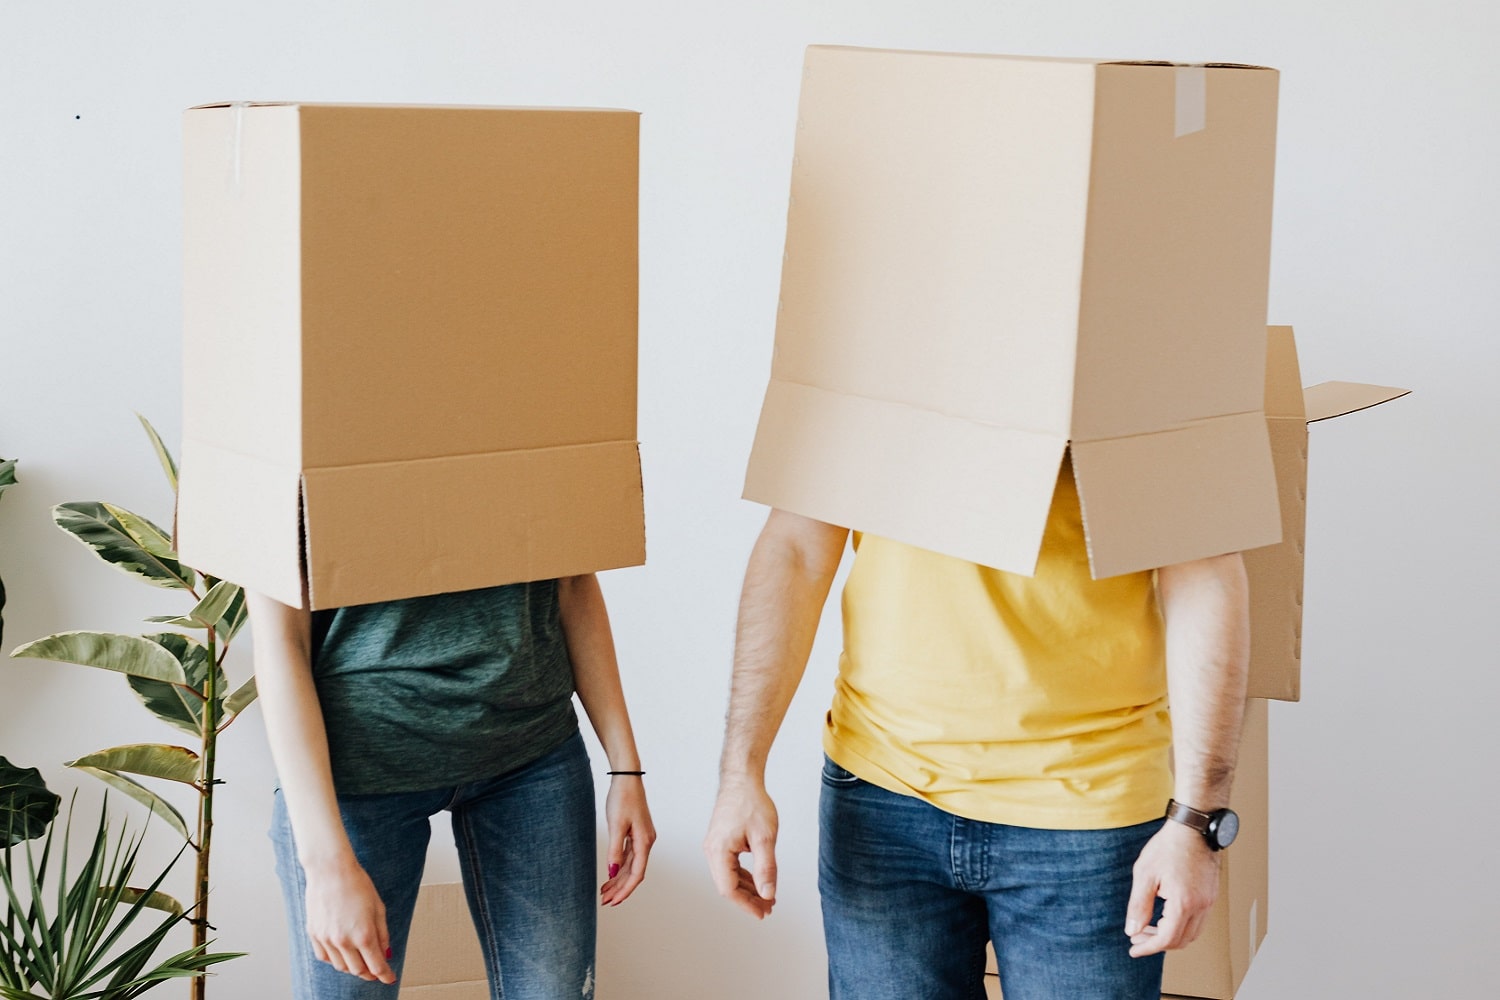 Two people with cardboard boxes on their heads, guessing Amazon shipping costs.